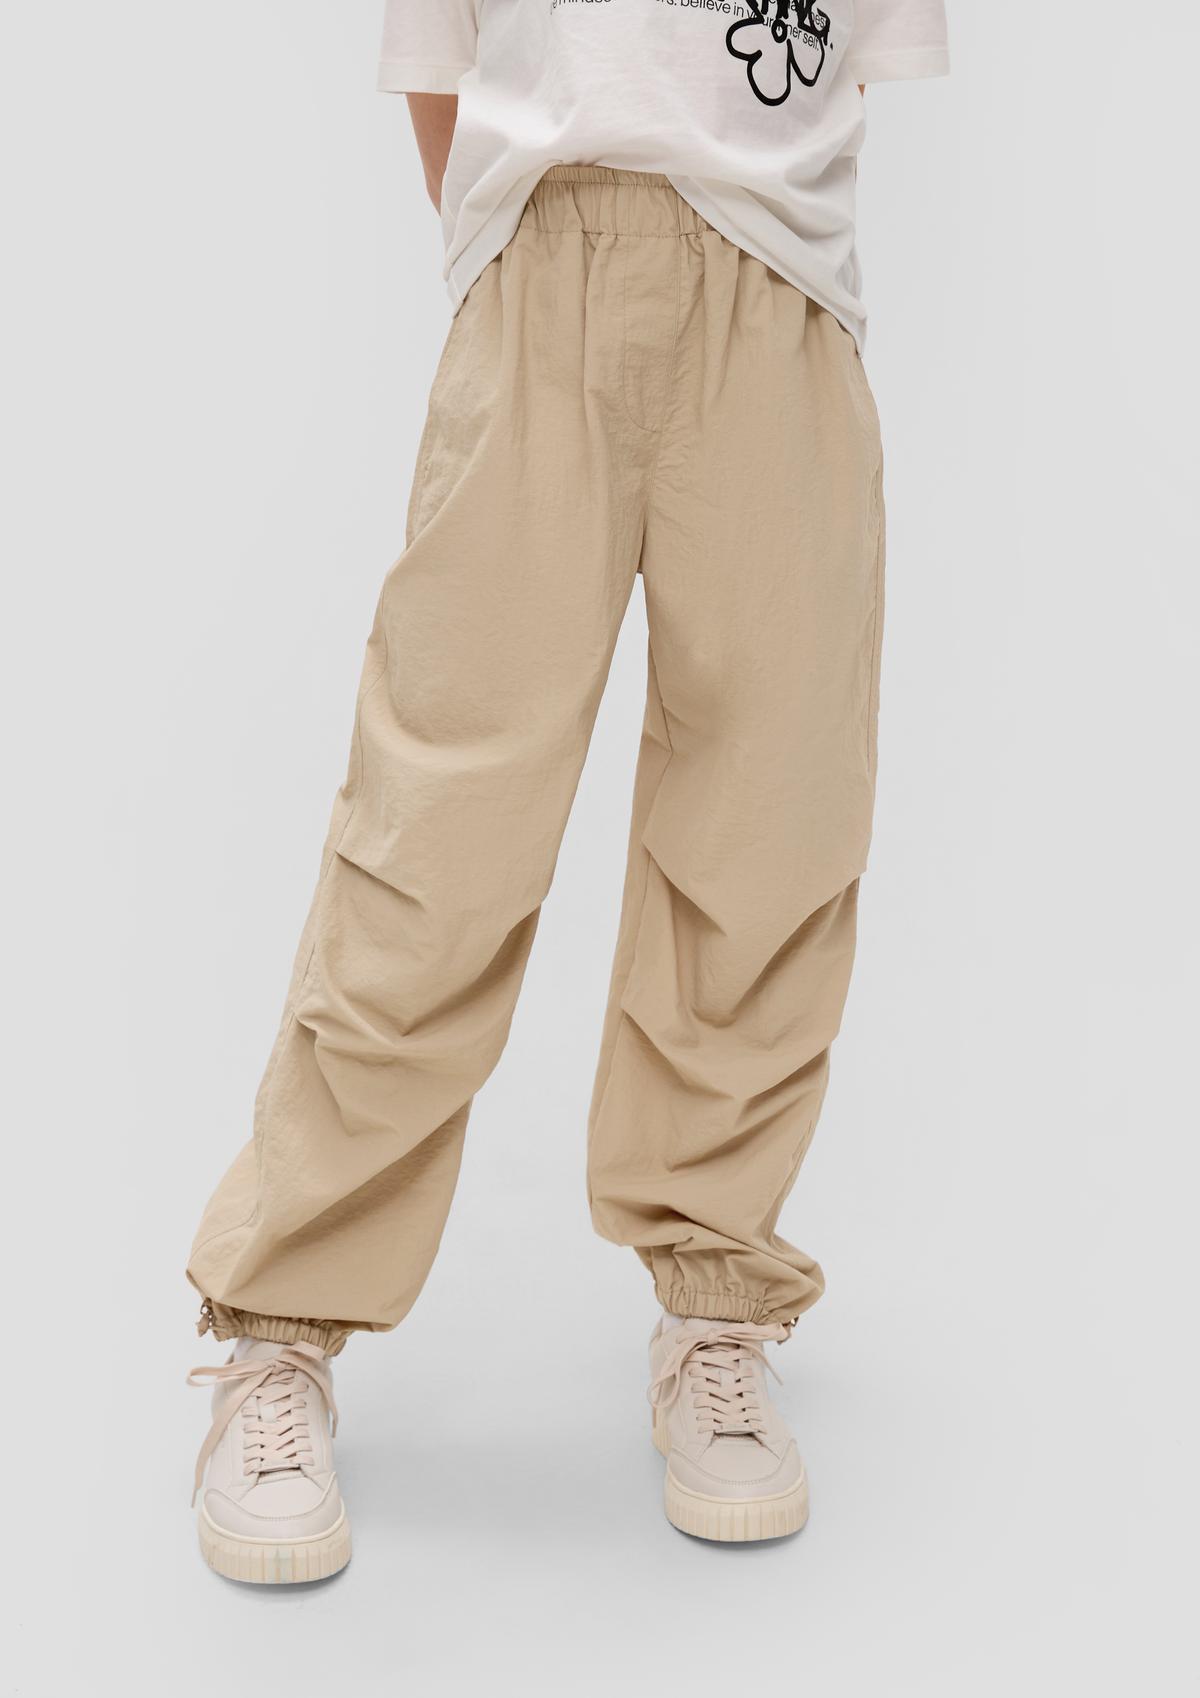 Parachute trousers with elastic